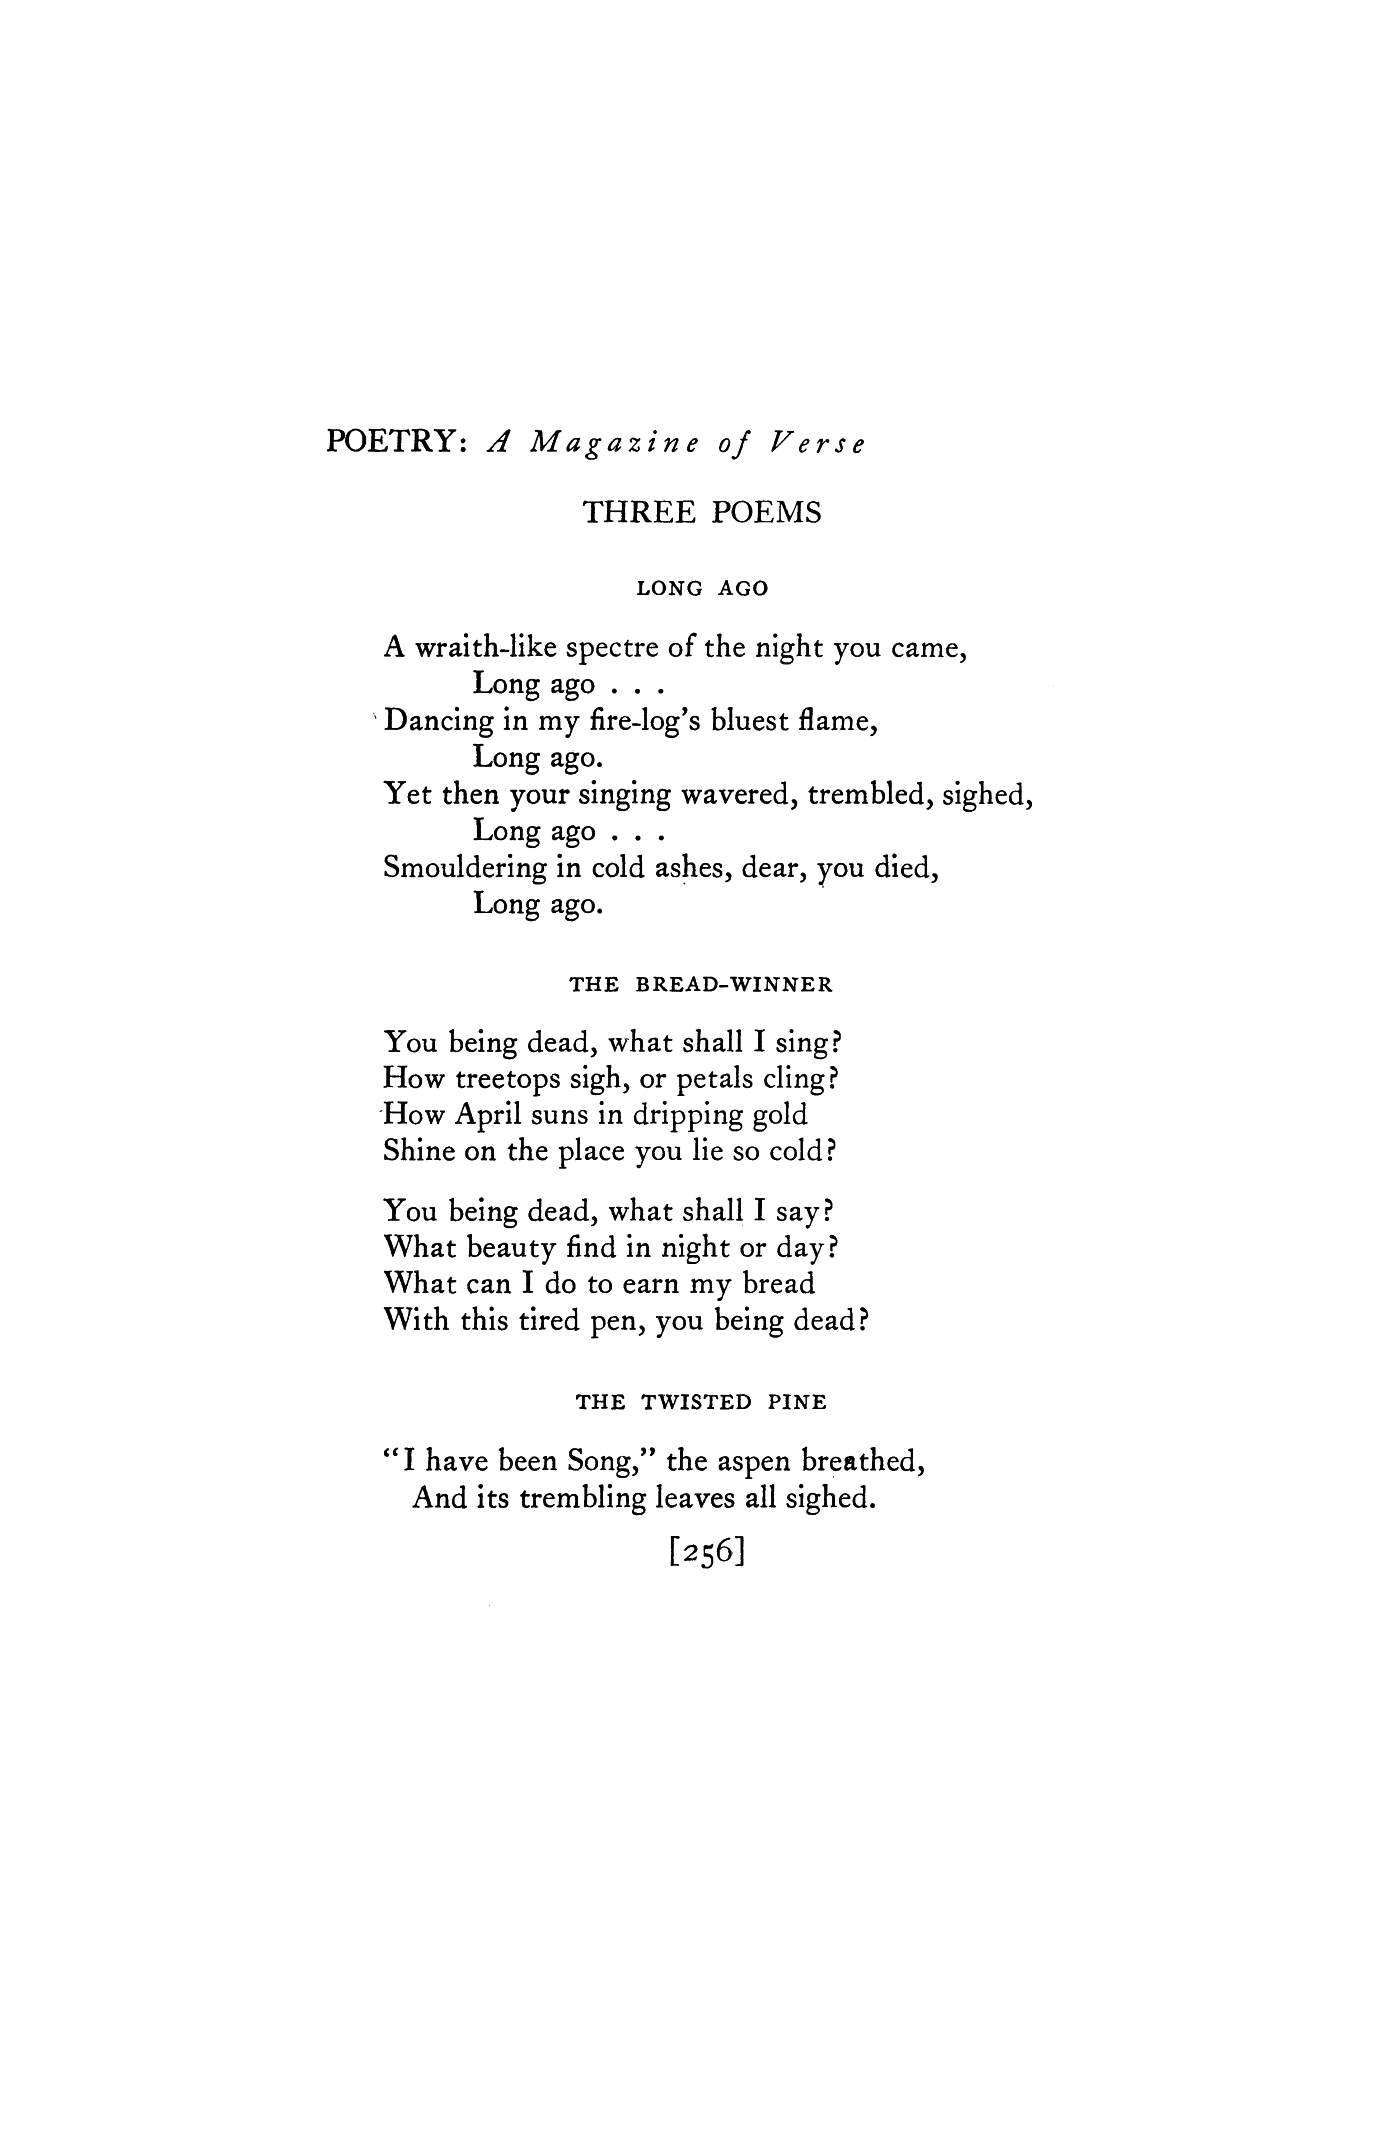 https://static.poetryfoundation.org/jstor/i20575152/pages/23.png